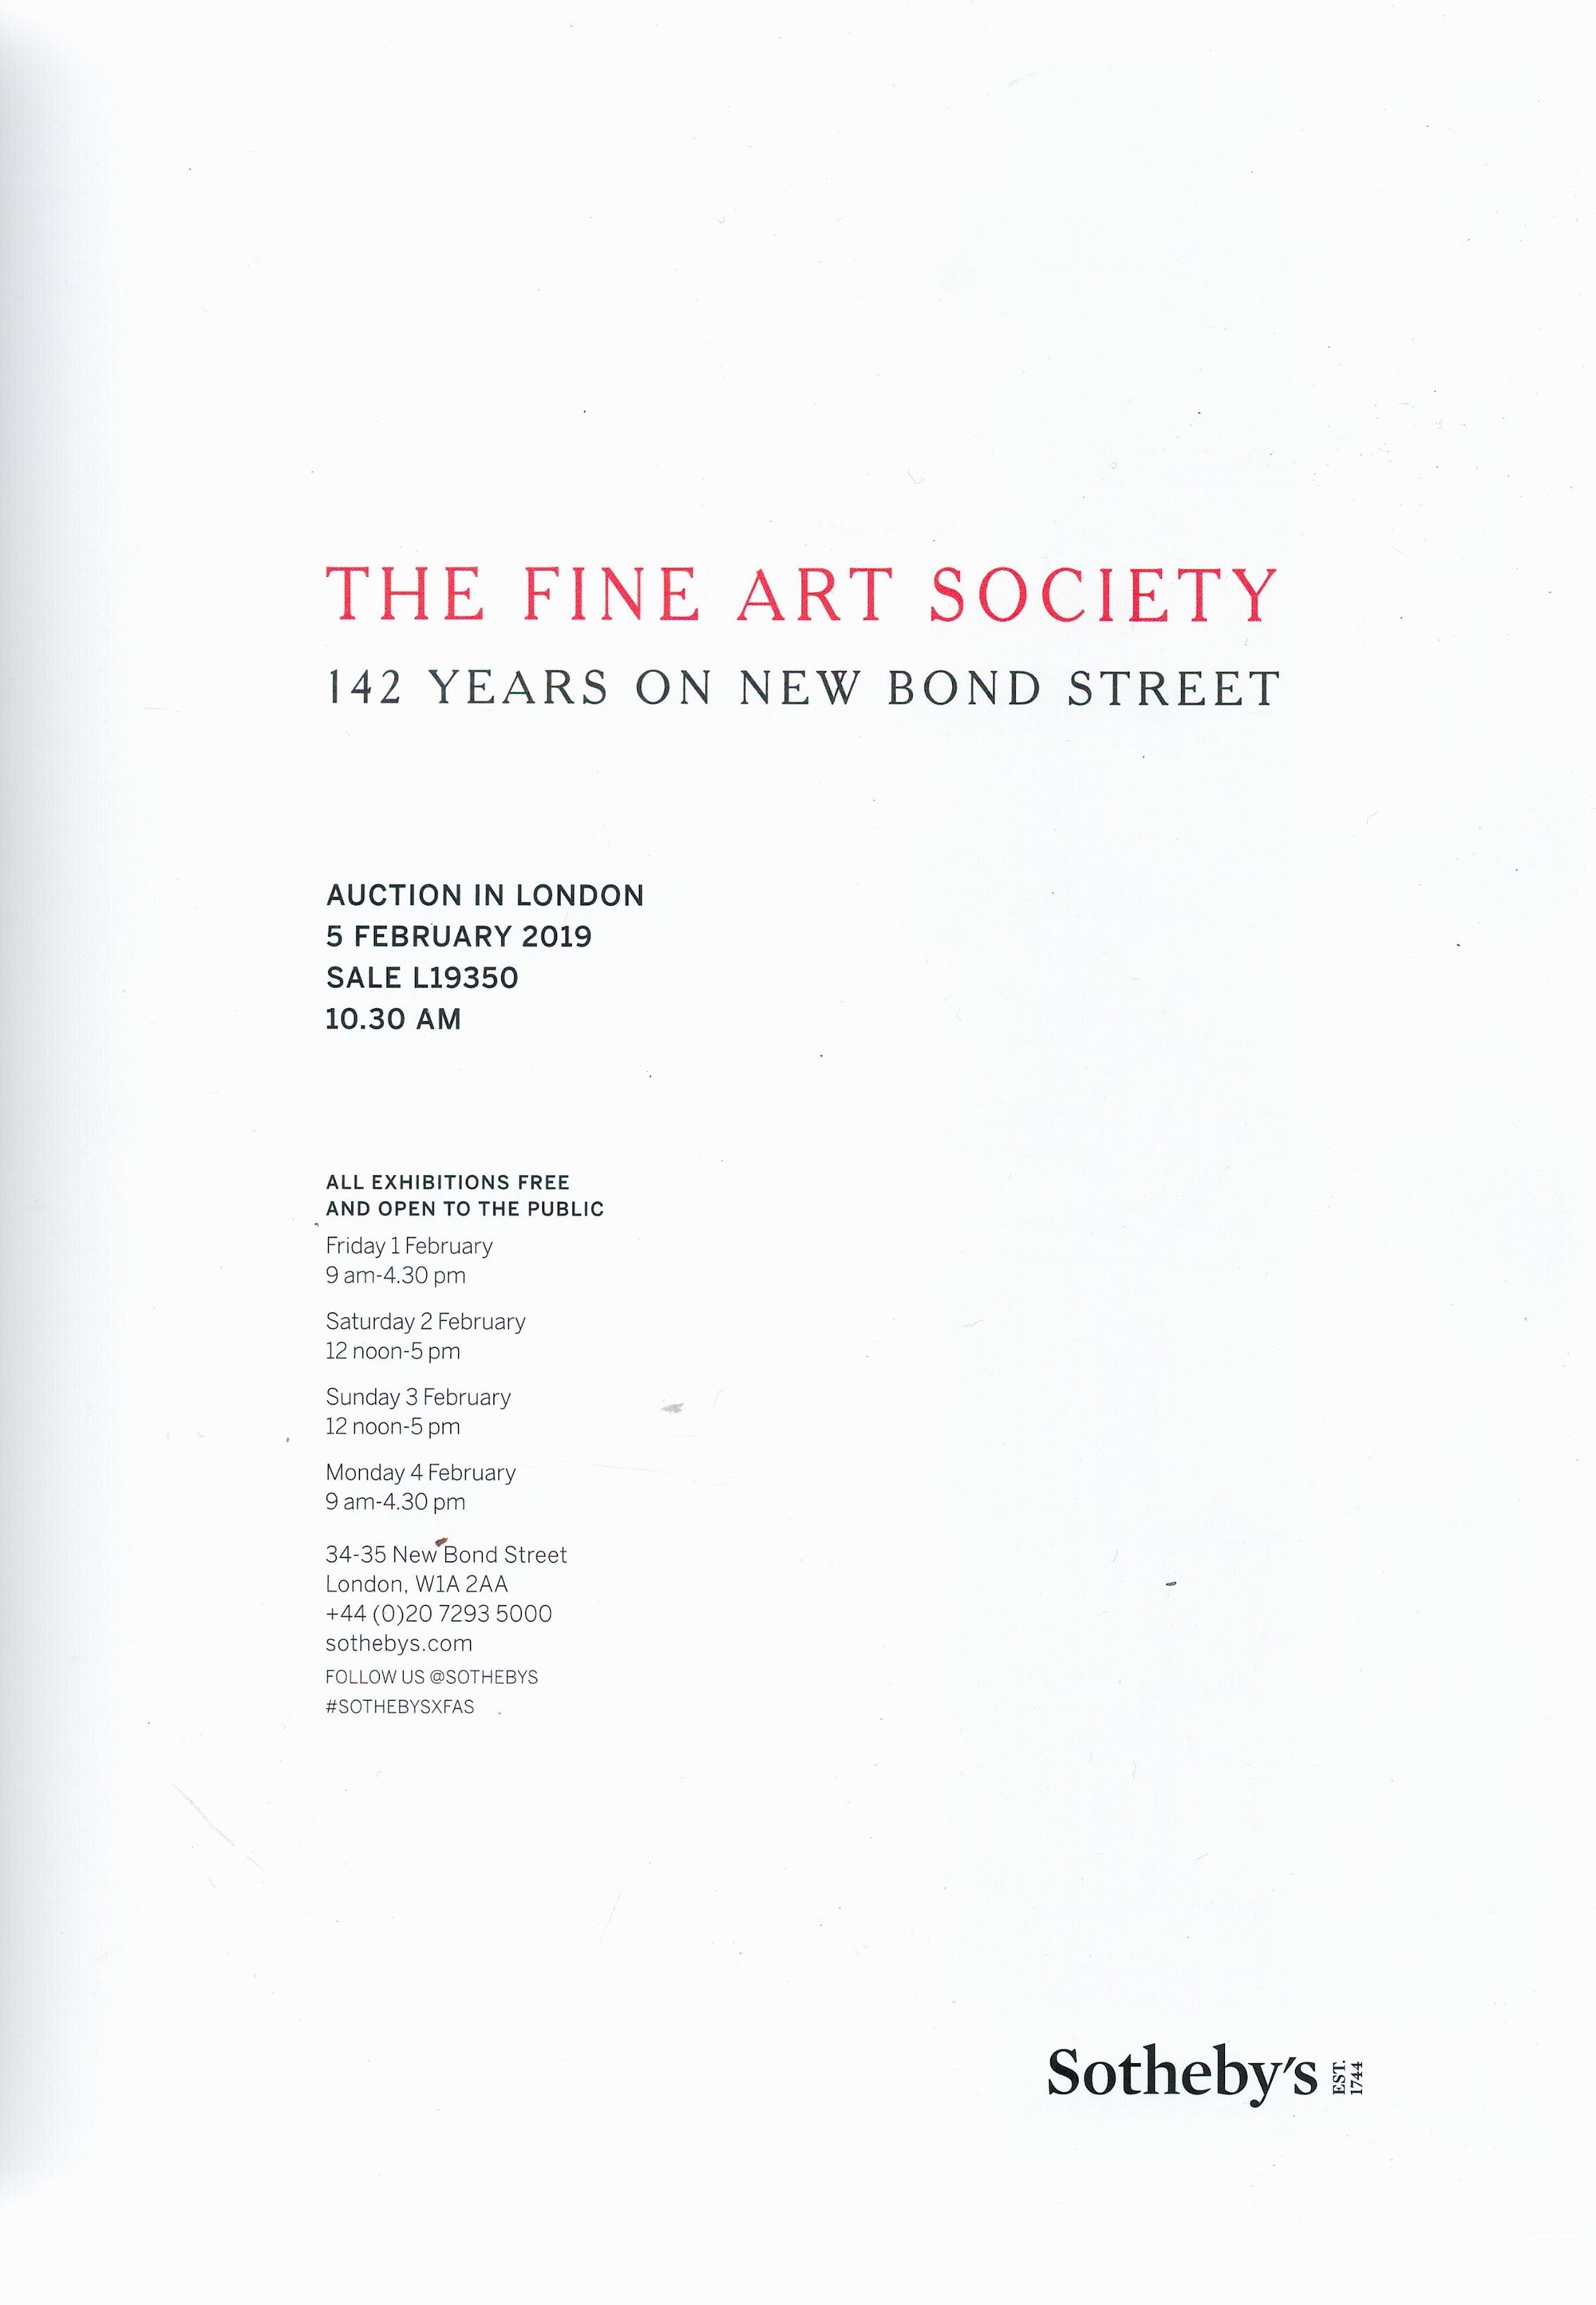 Sotheby's The Fine Art Society 142 Years on New Bond Street Softback Book 2019 First Edition - Image 3 of 4